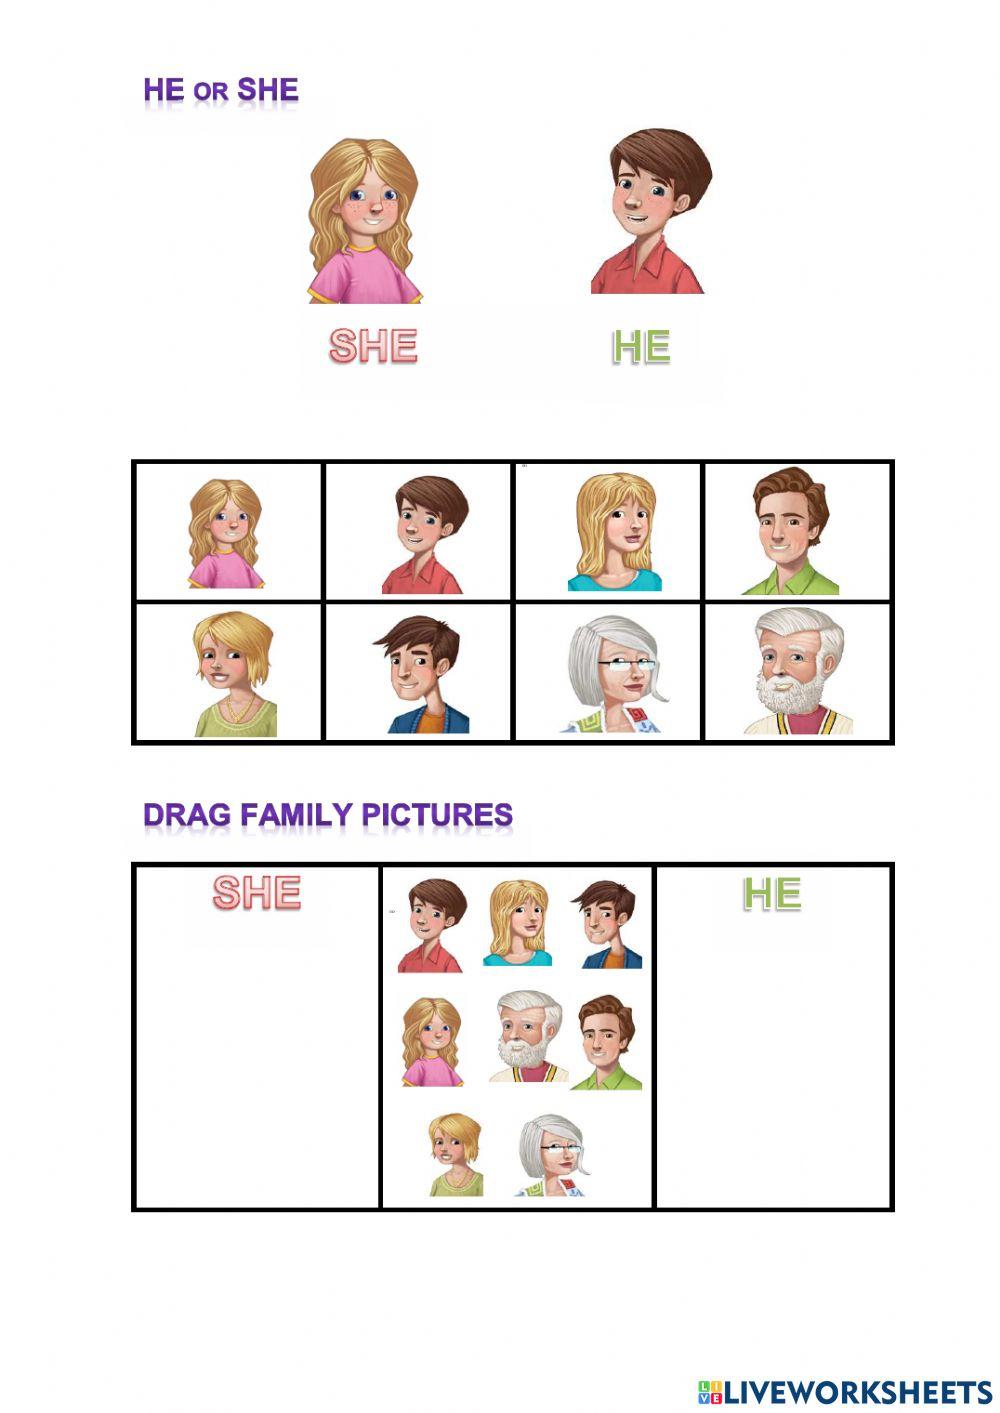 He or she - family